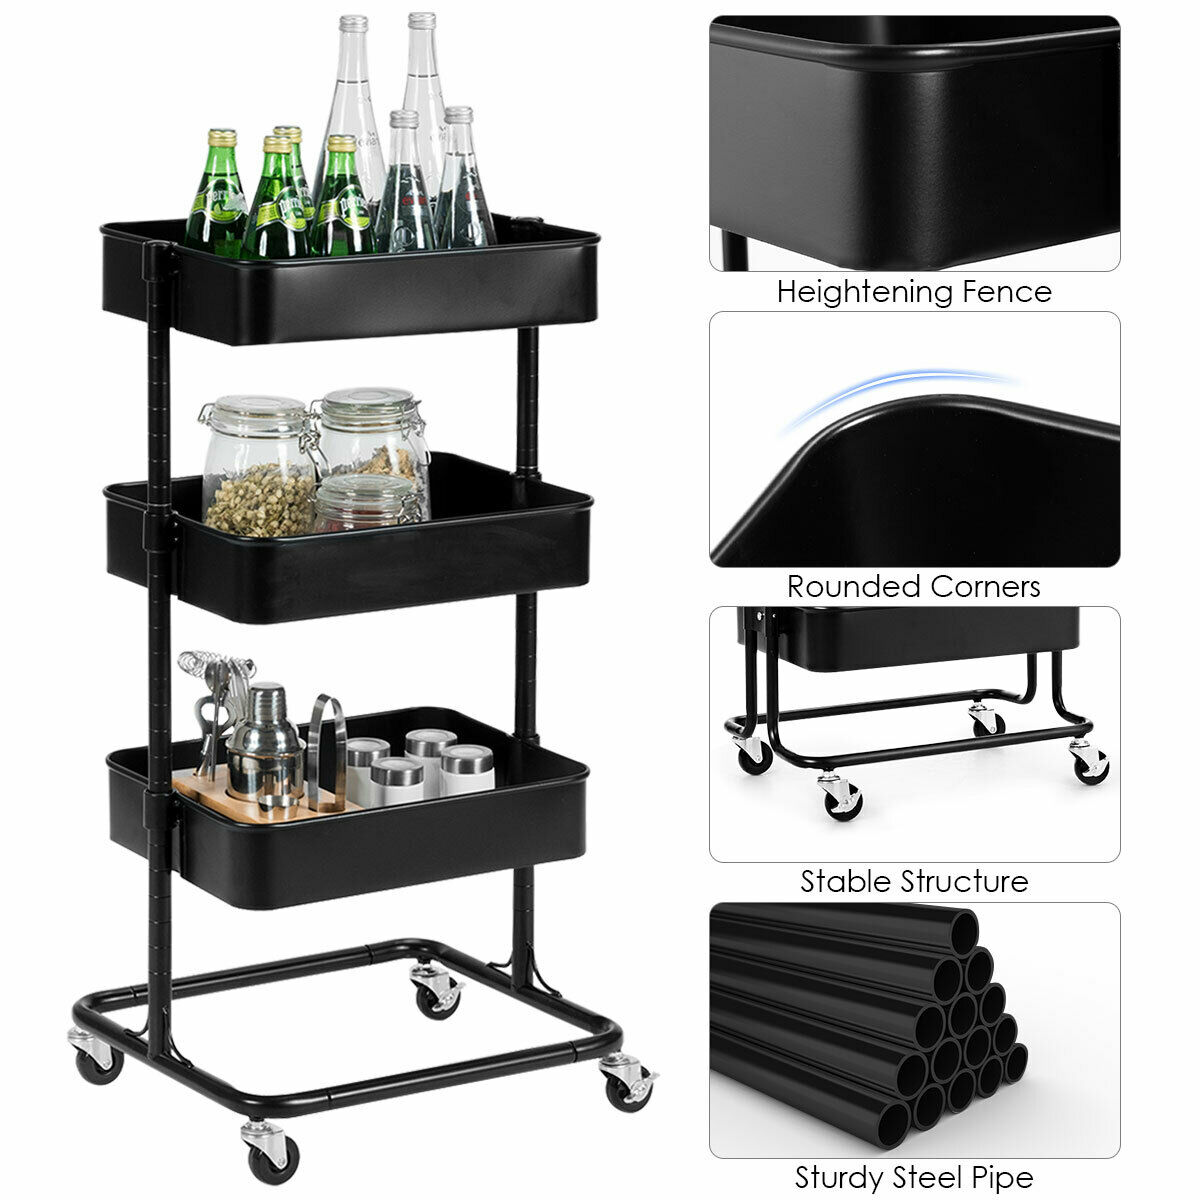 Rolling Metal Organization Cart with Handle and Lockable Wheels Storage Shelves-Black 3 Tier Home Kitchen Mesh Utility Cart